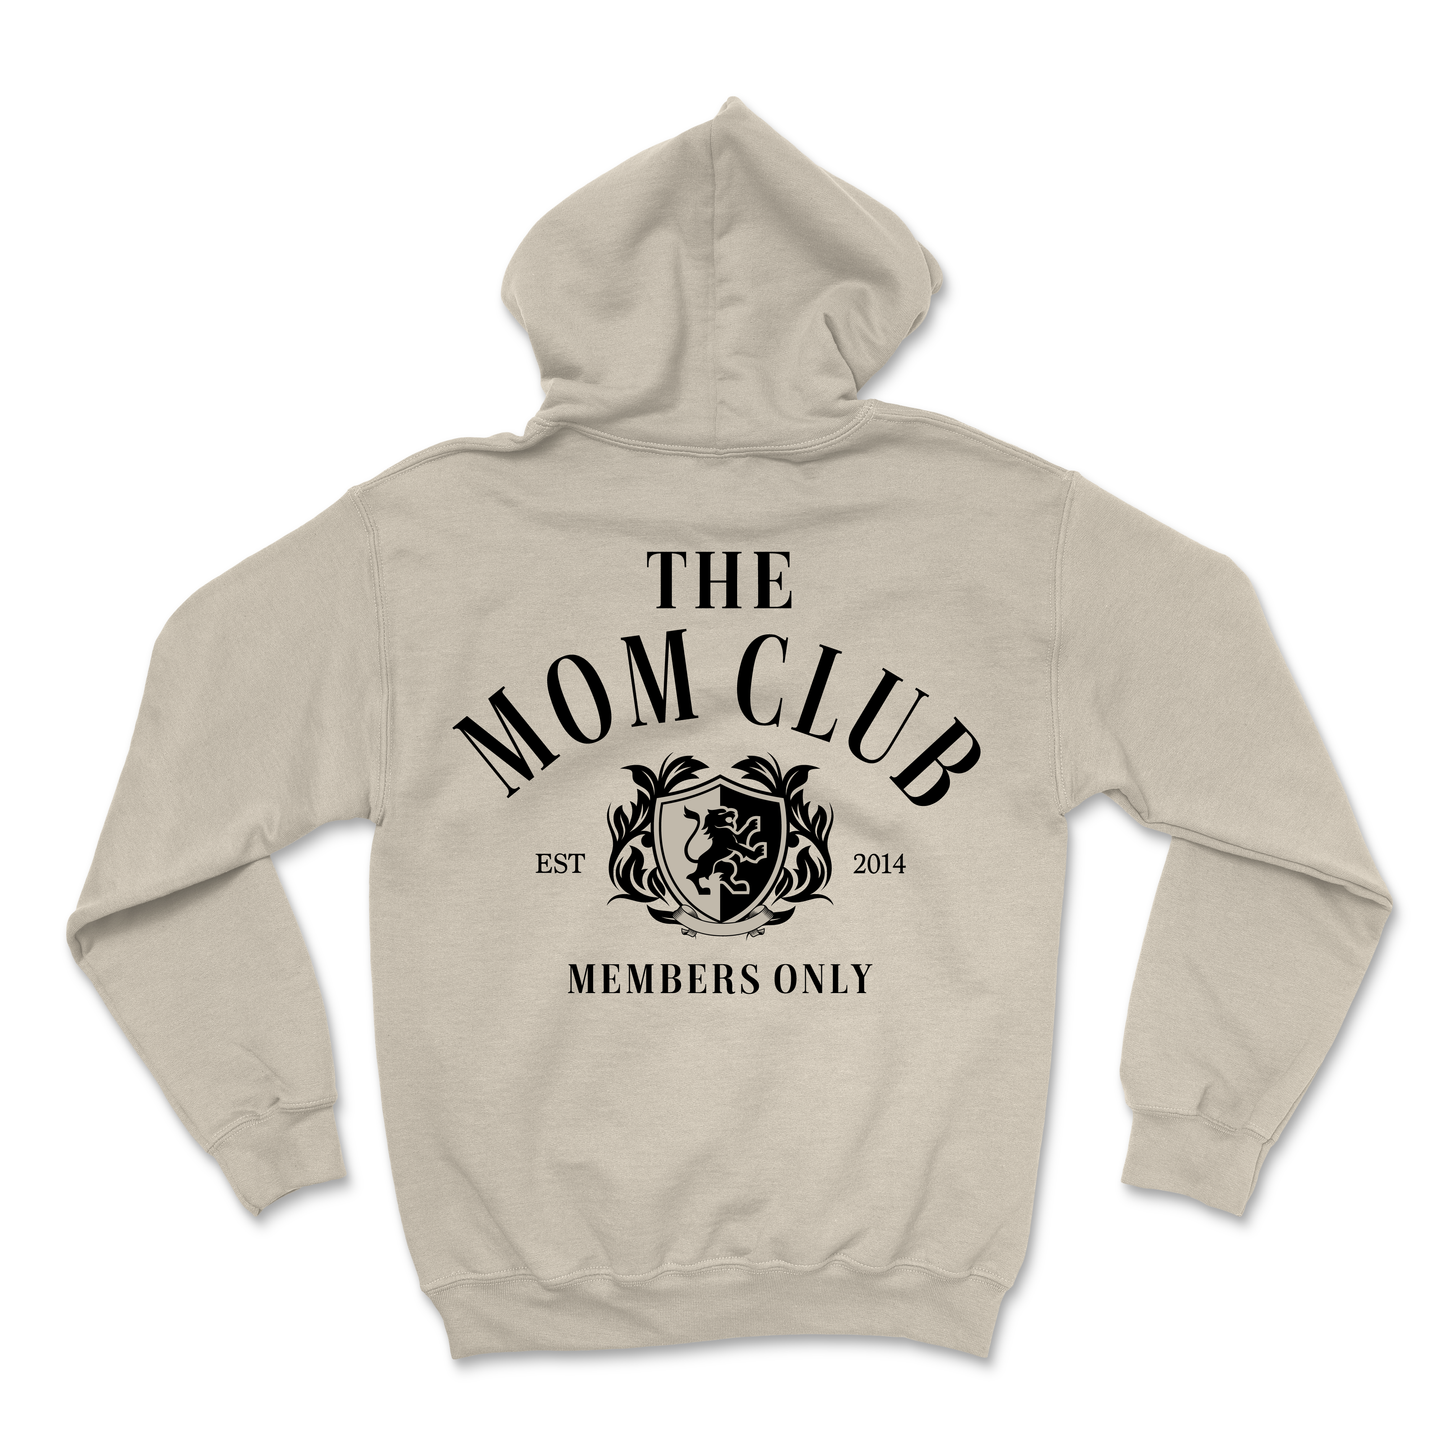 MOM CLUB SWEATER OR SHIRT <BR>MORE COLORS AVAILABLE